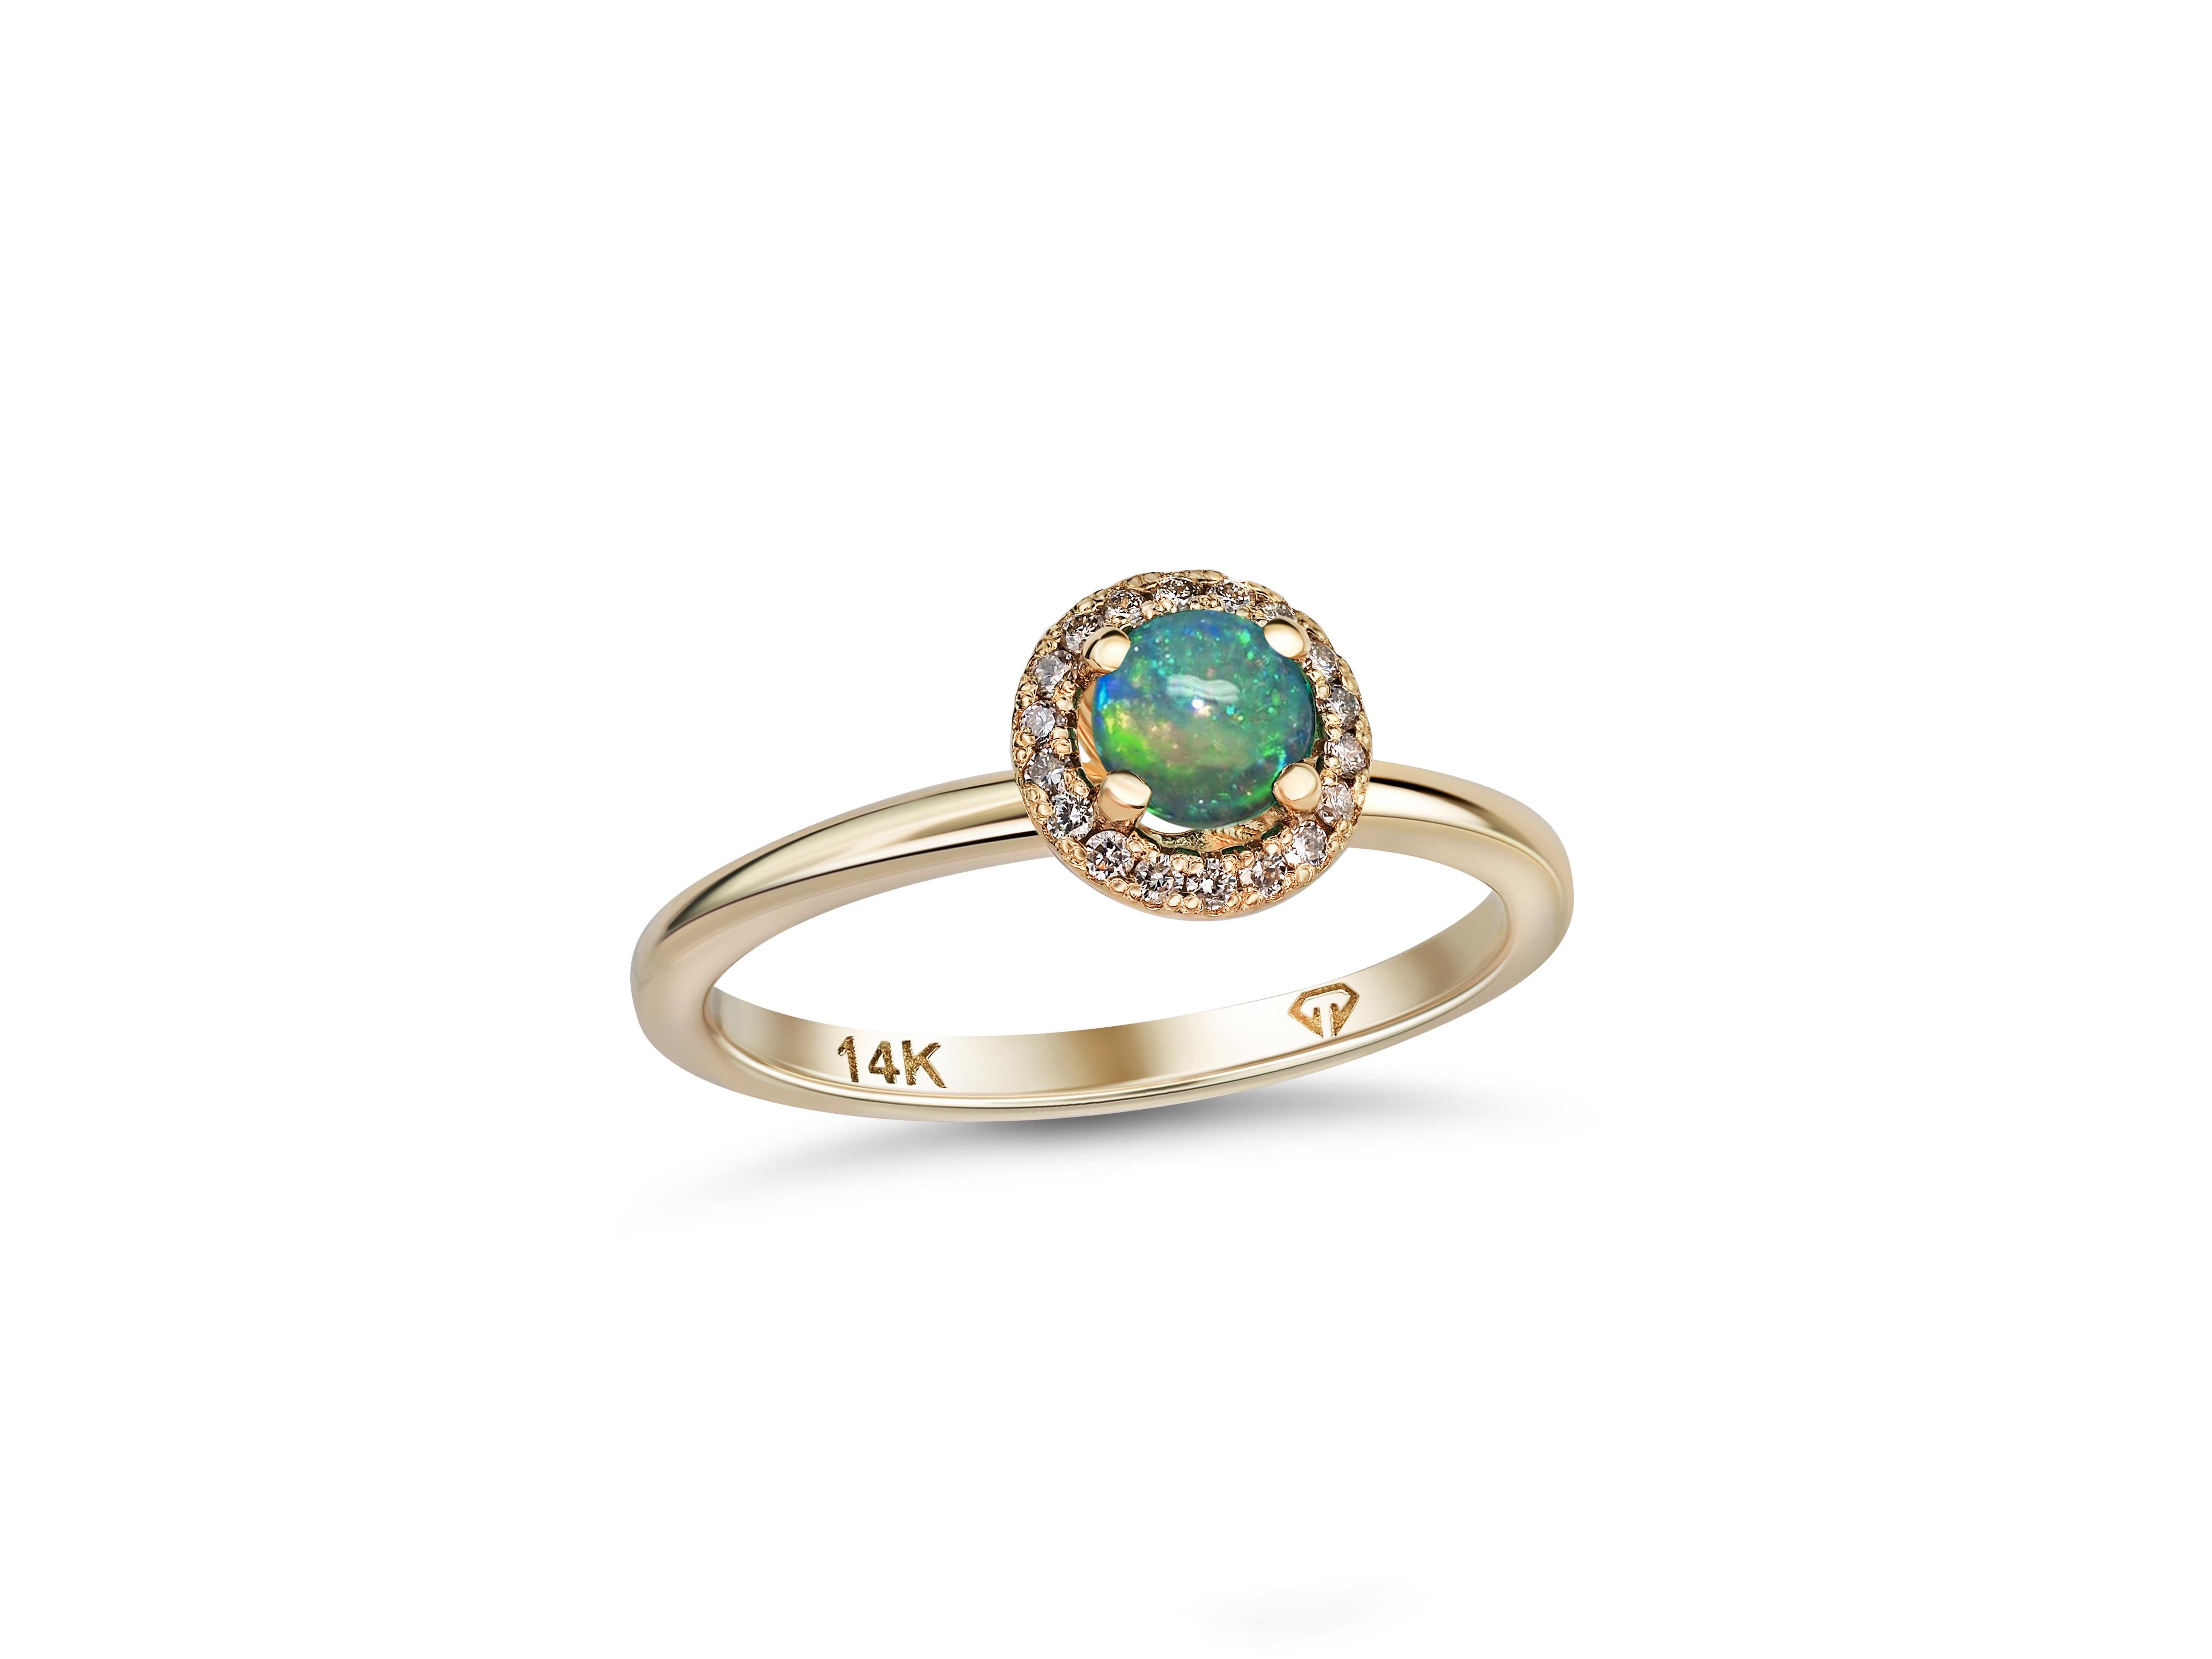 For Sale:  Opal and Diamonds 14k Gold Ring. Round Halo Opal Gold Ring! 5